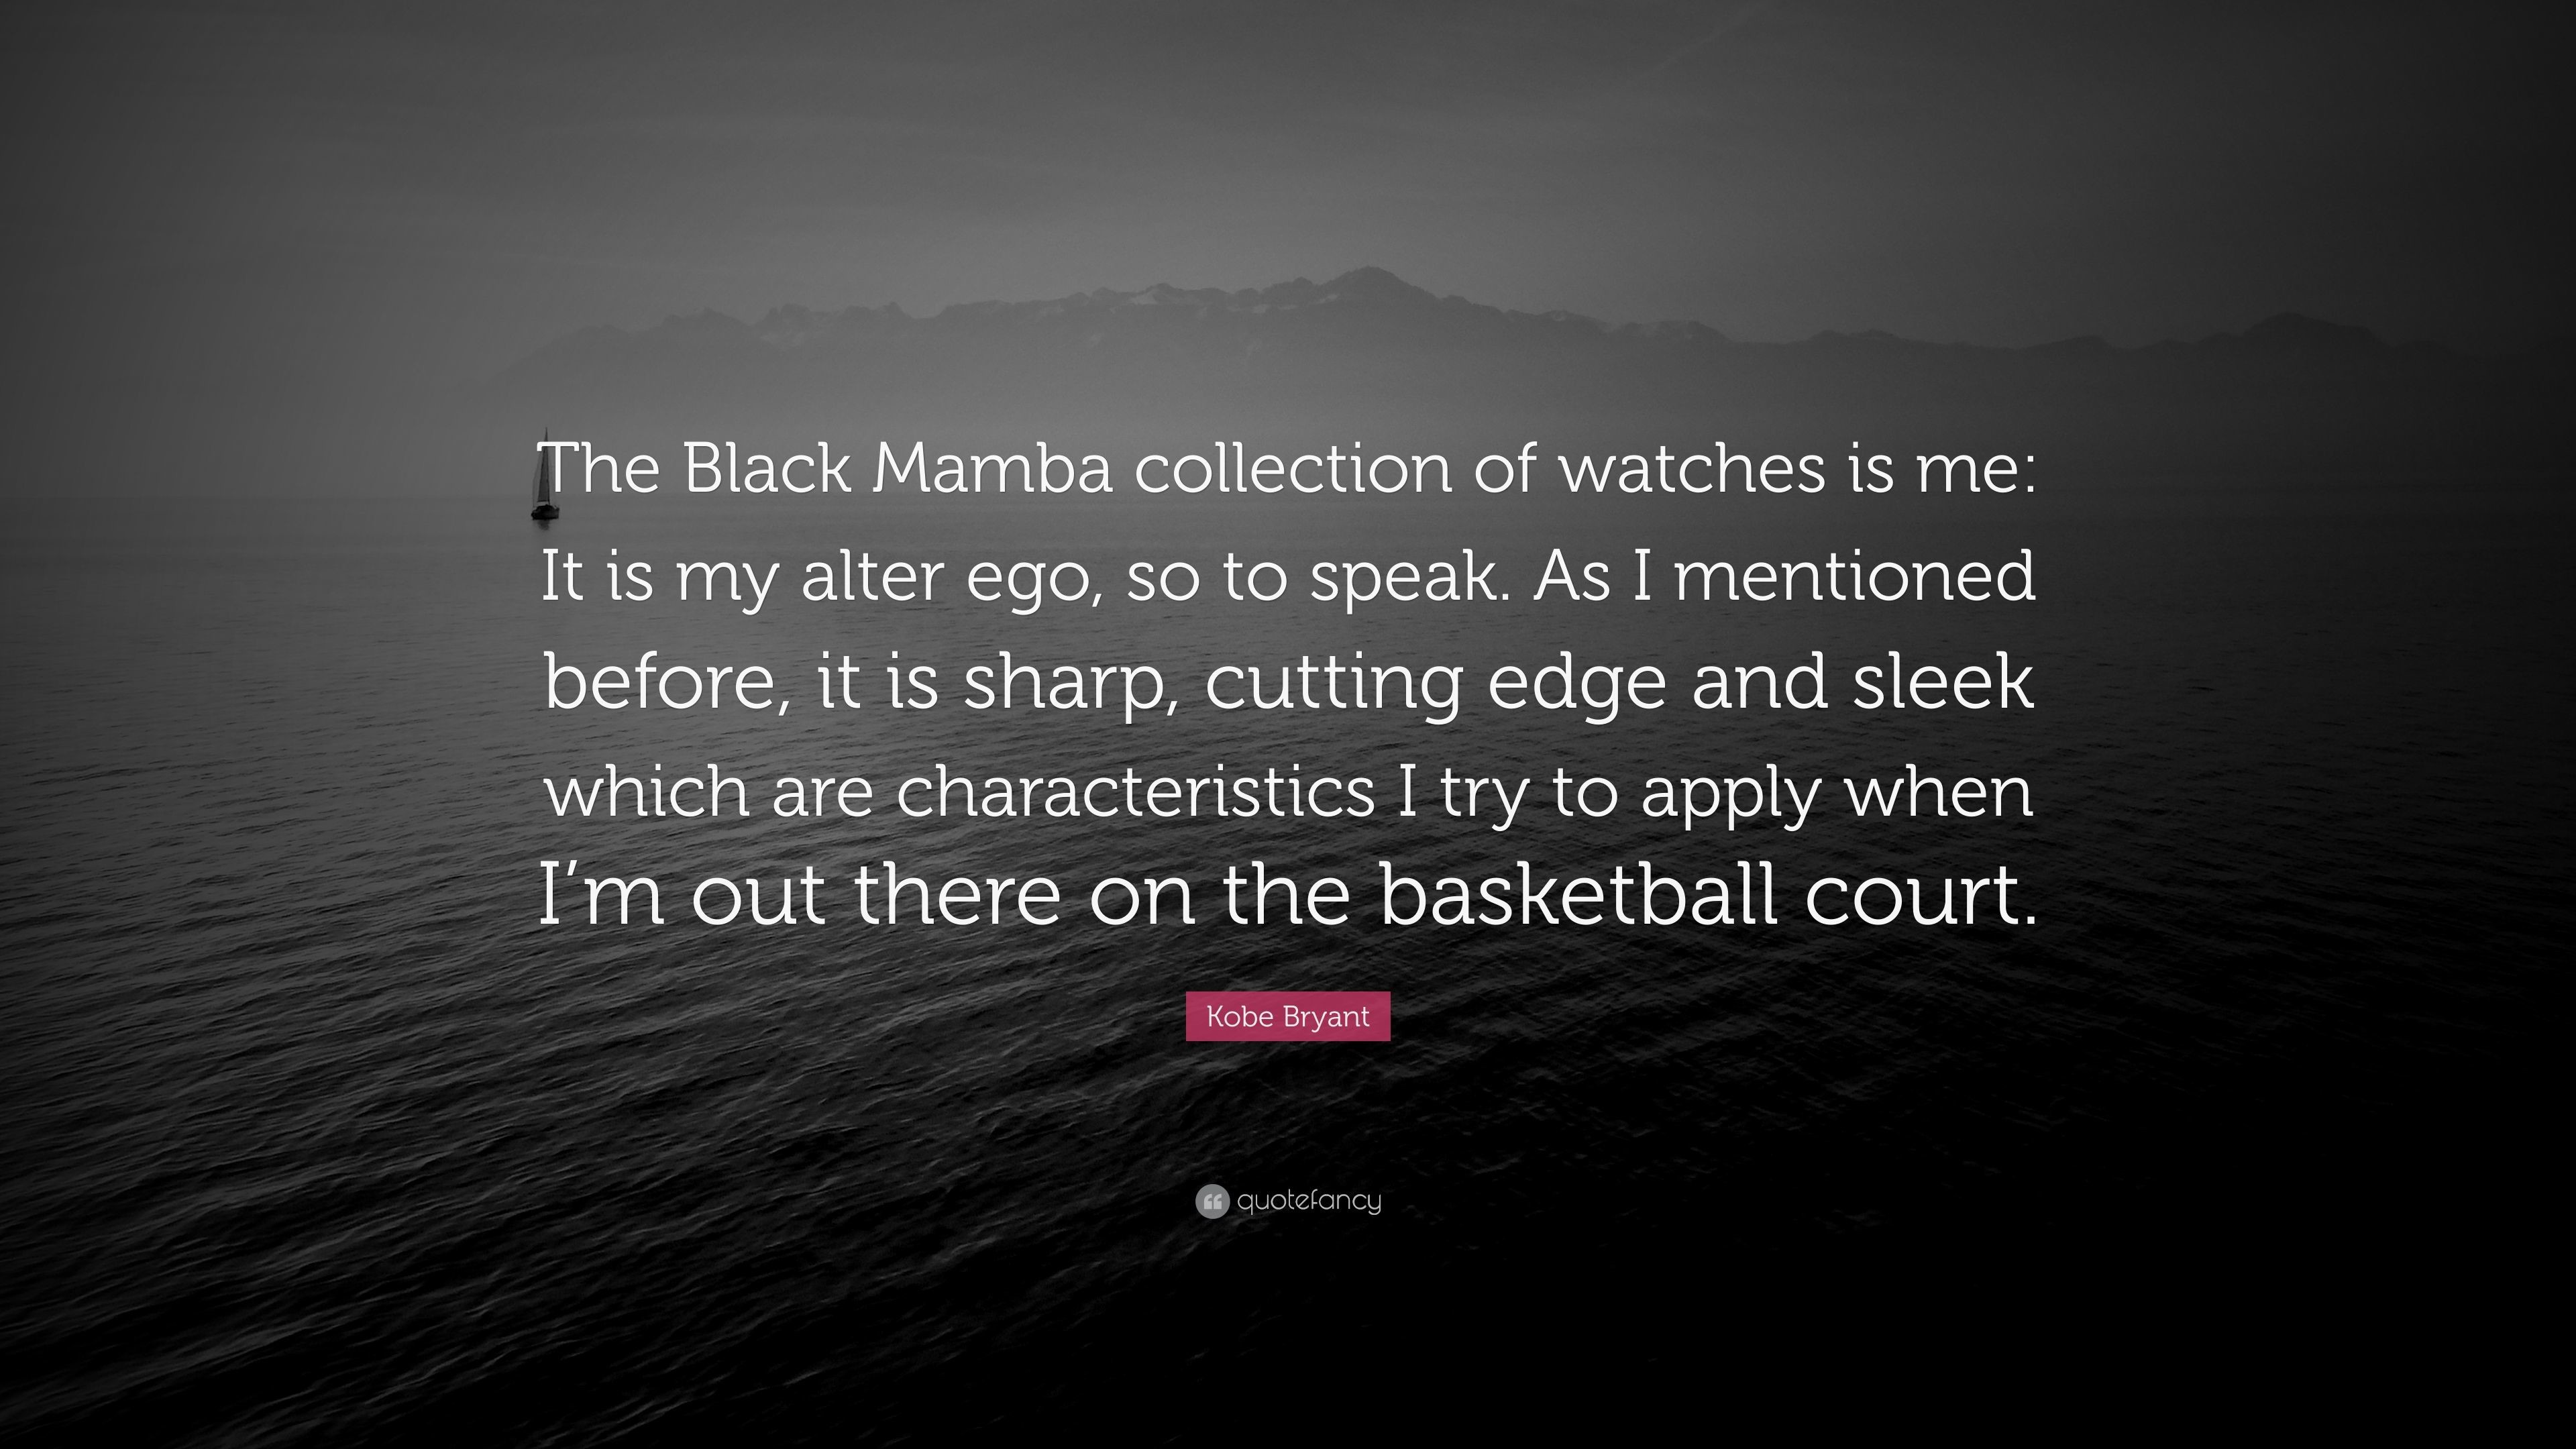 3840x2160 Kobe Bryant Quote: “The Black Mamba collection of watches is me: It is